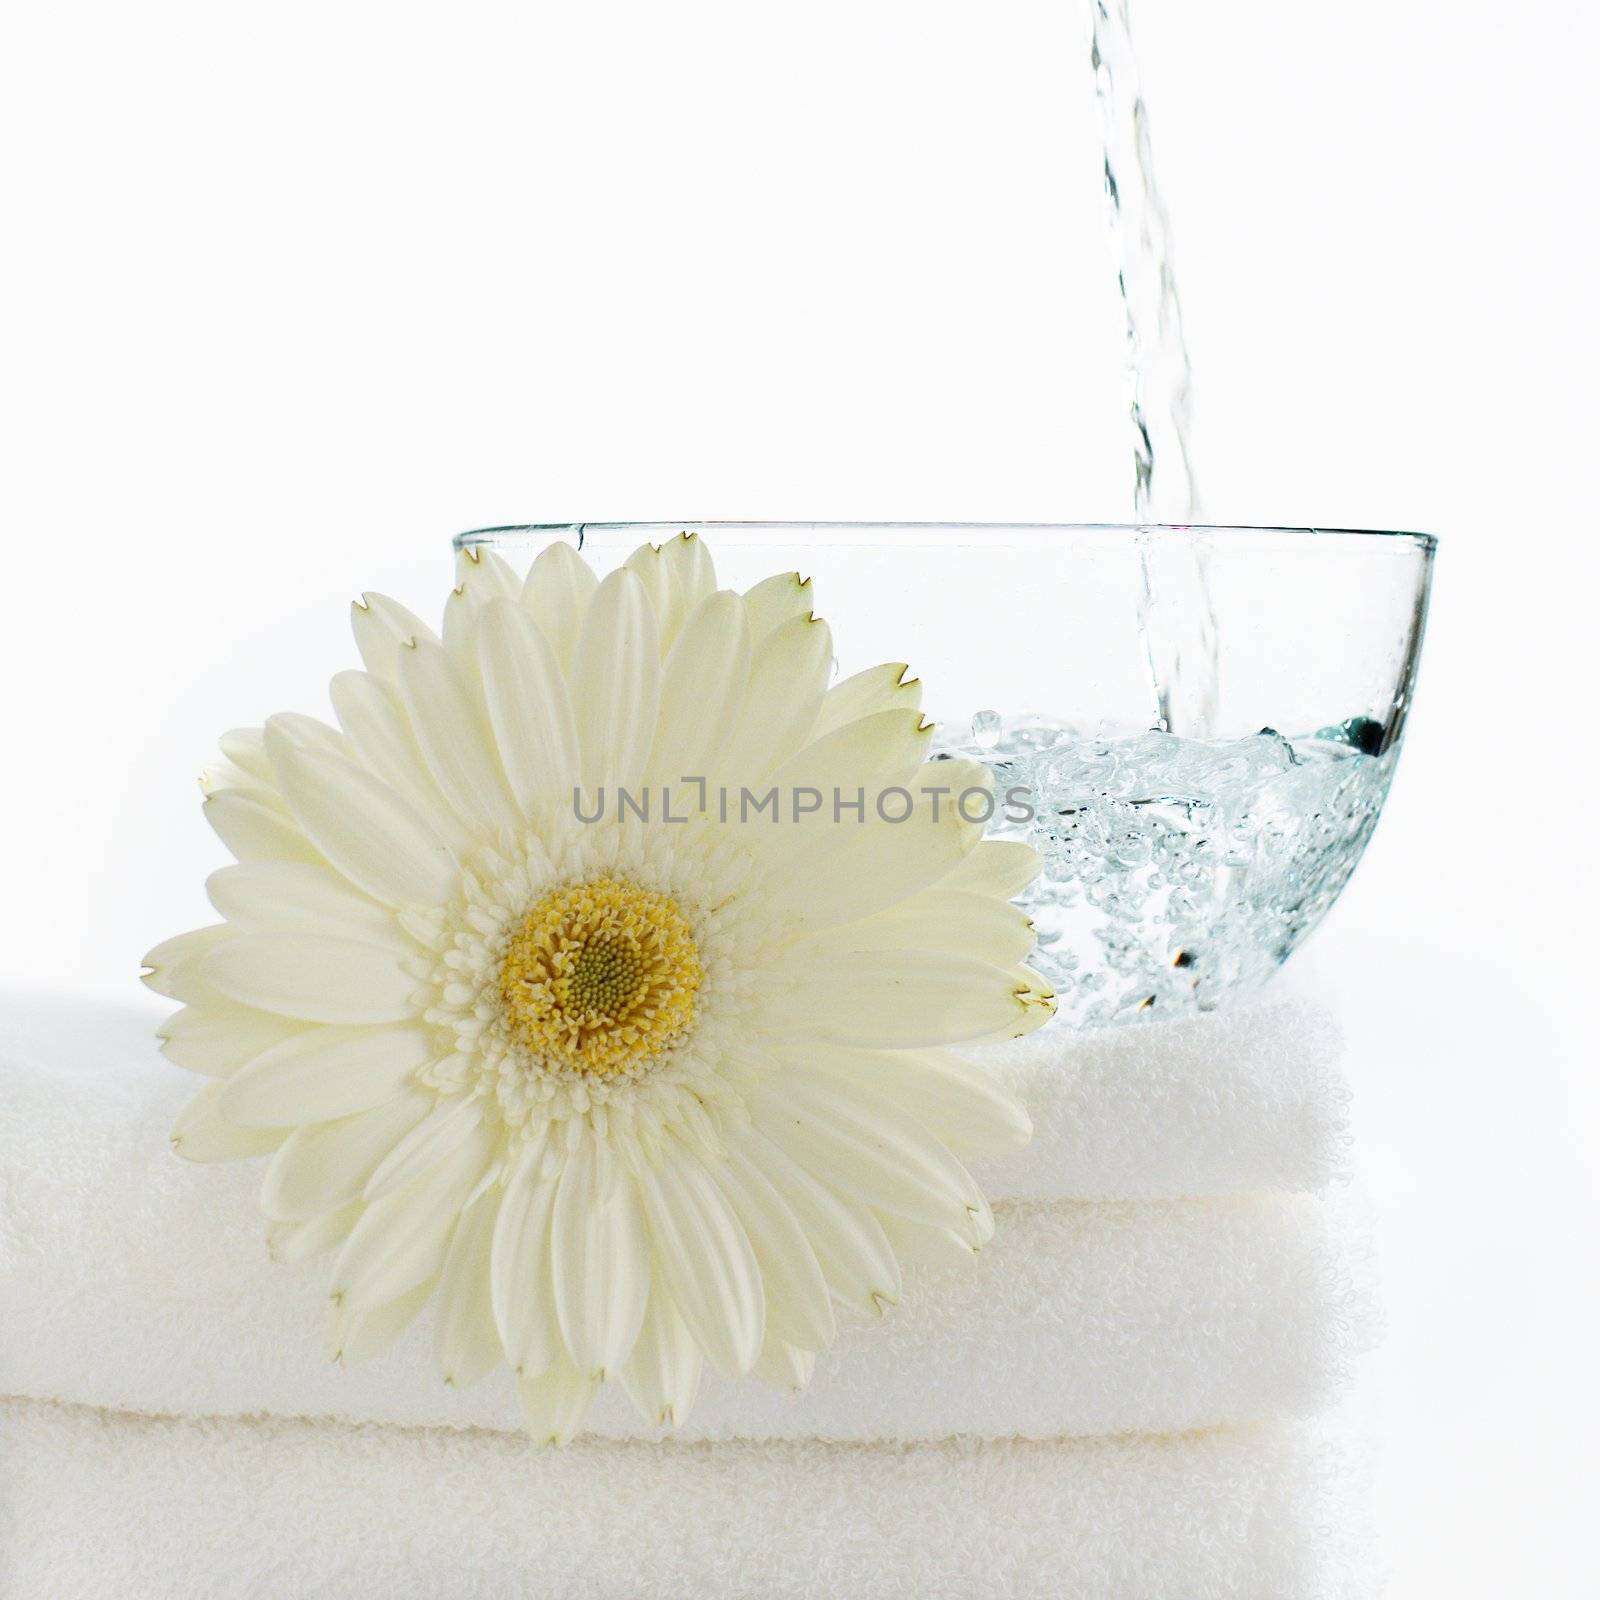 Water pouring into a clear bowl against white with flower.